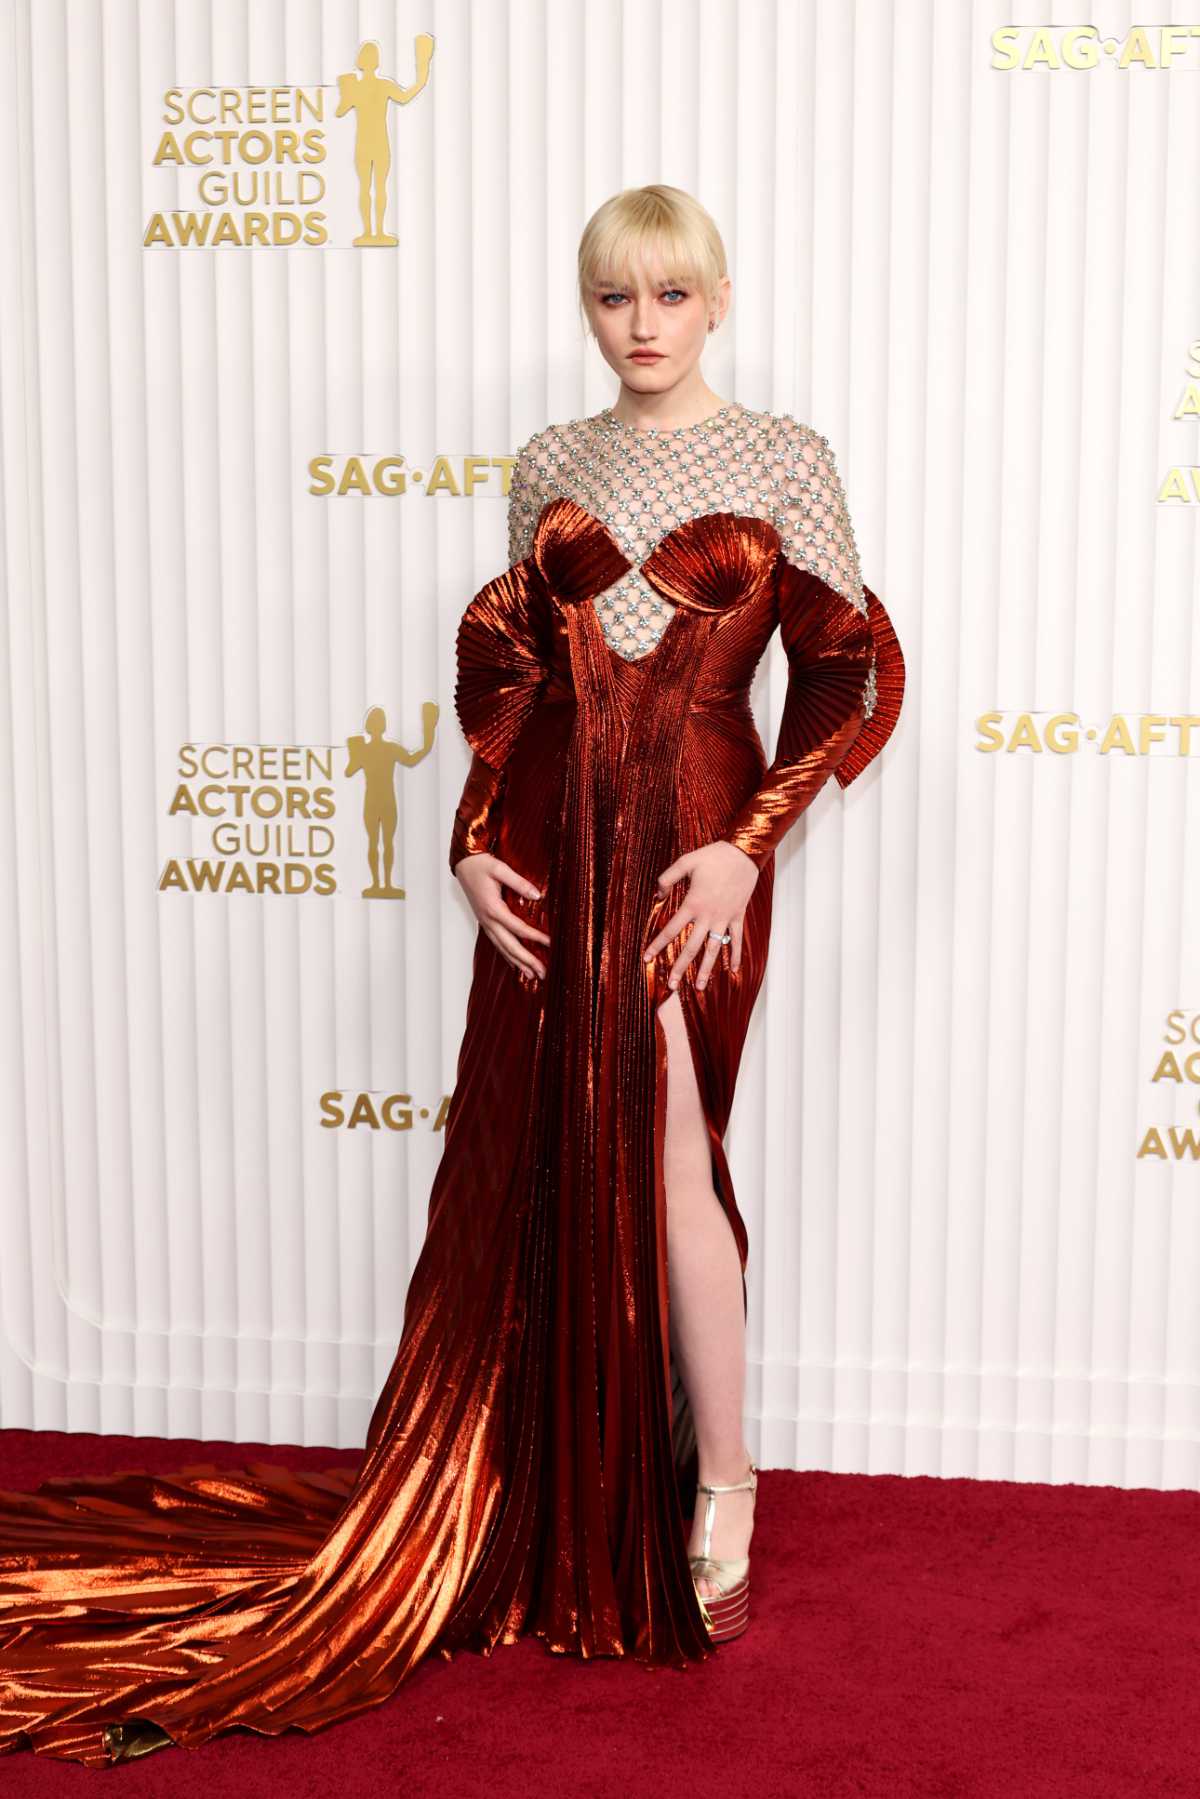 VIPs In Gucci At The 29th Annual Screen Actors Guild Awards